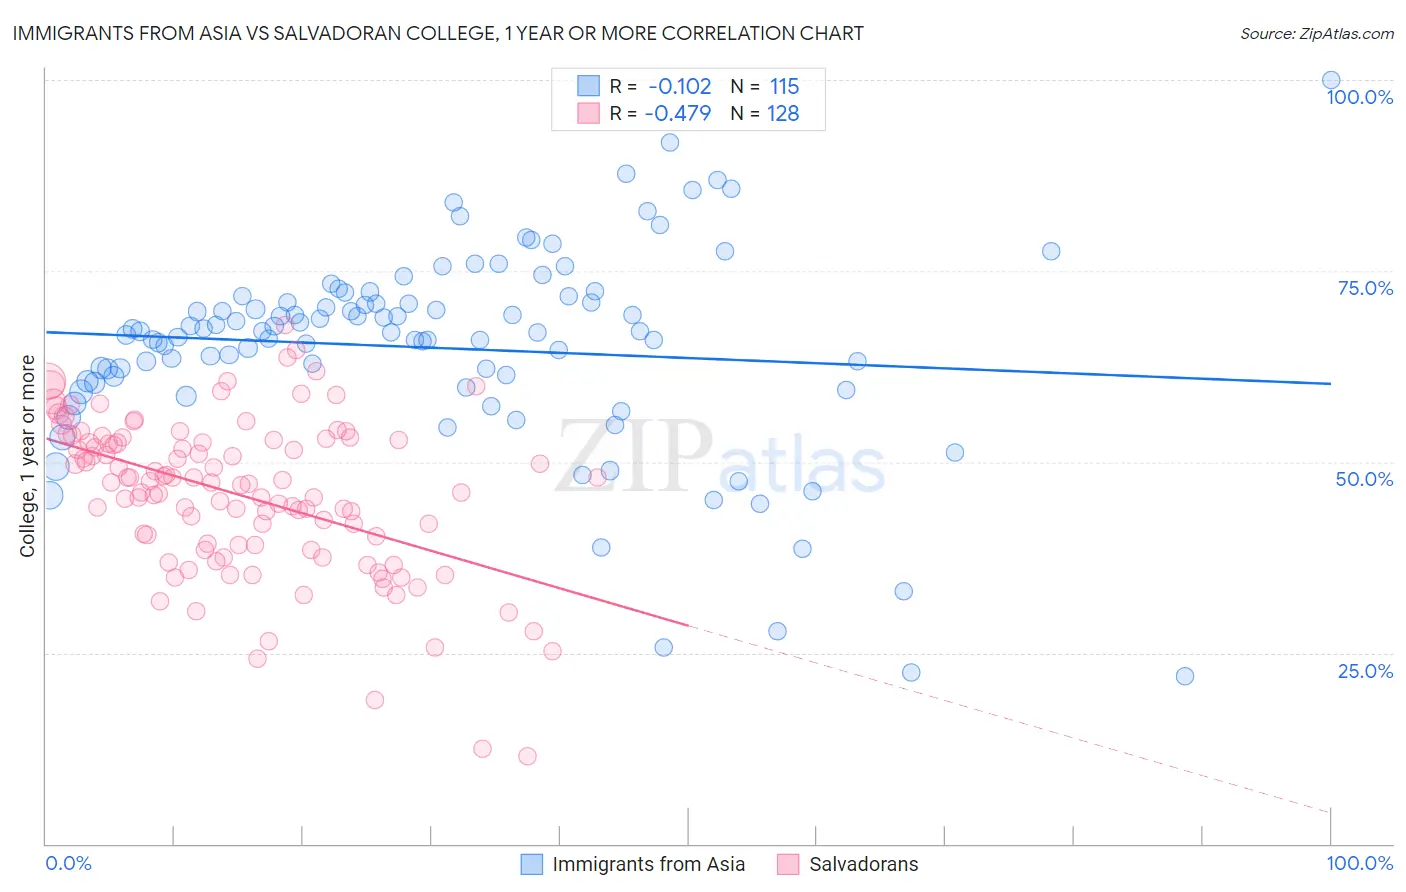 Immigrants from Asia vs Salvadoran College, 1 year or more